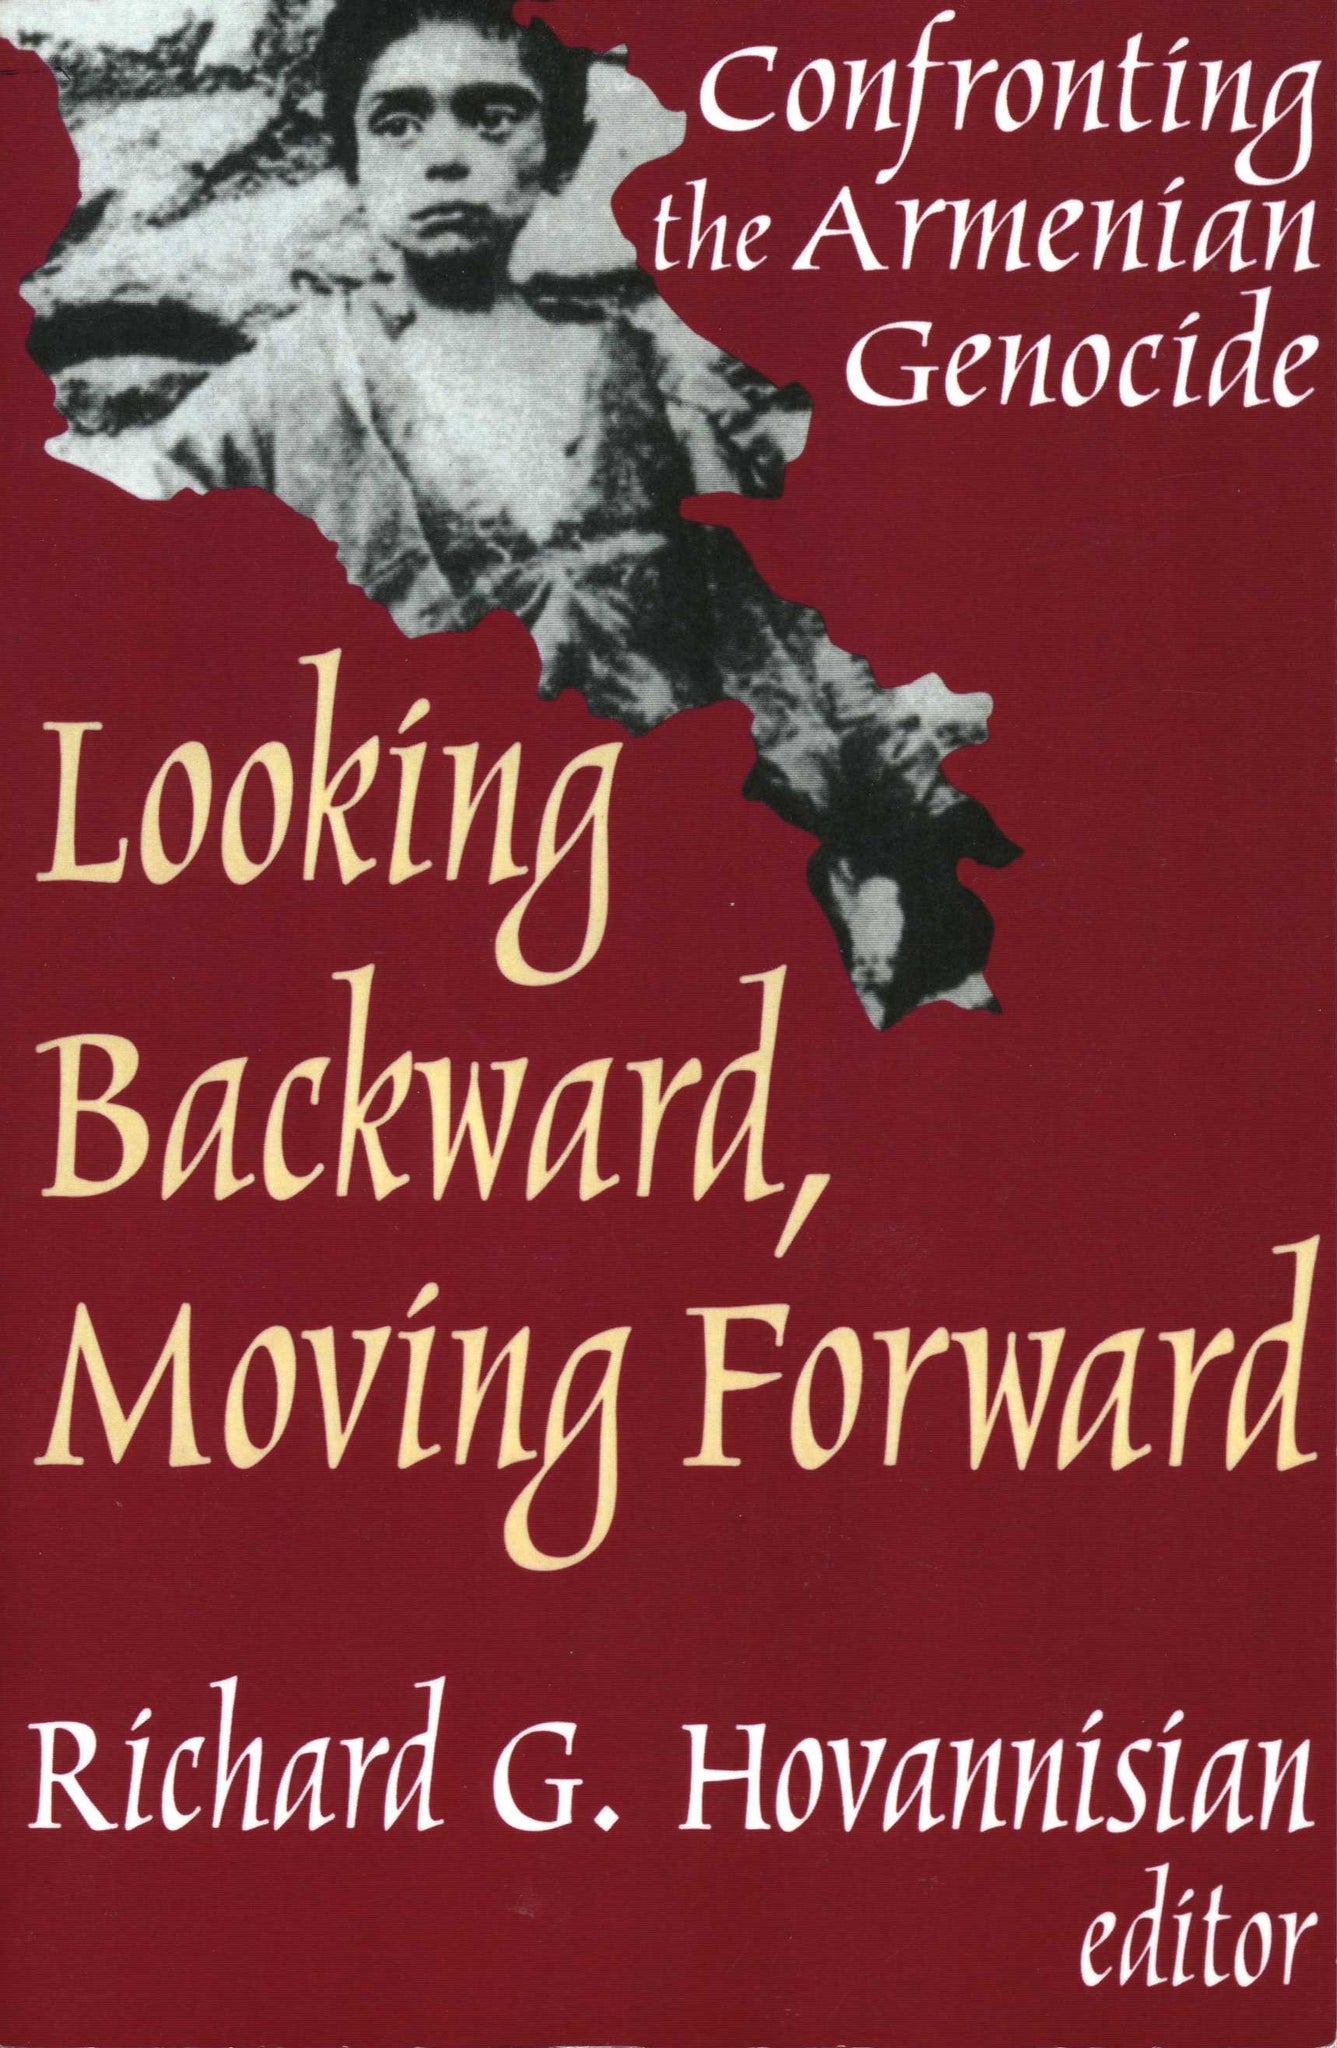 LOOKING BACKWARD, MOVING FORWARD: Confronting the Armenian Genocide